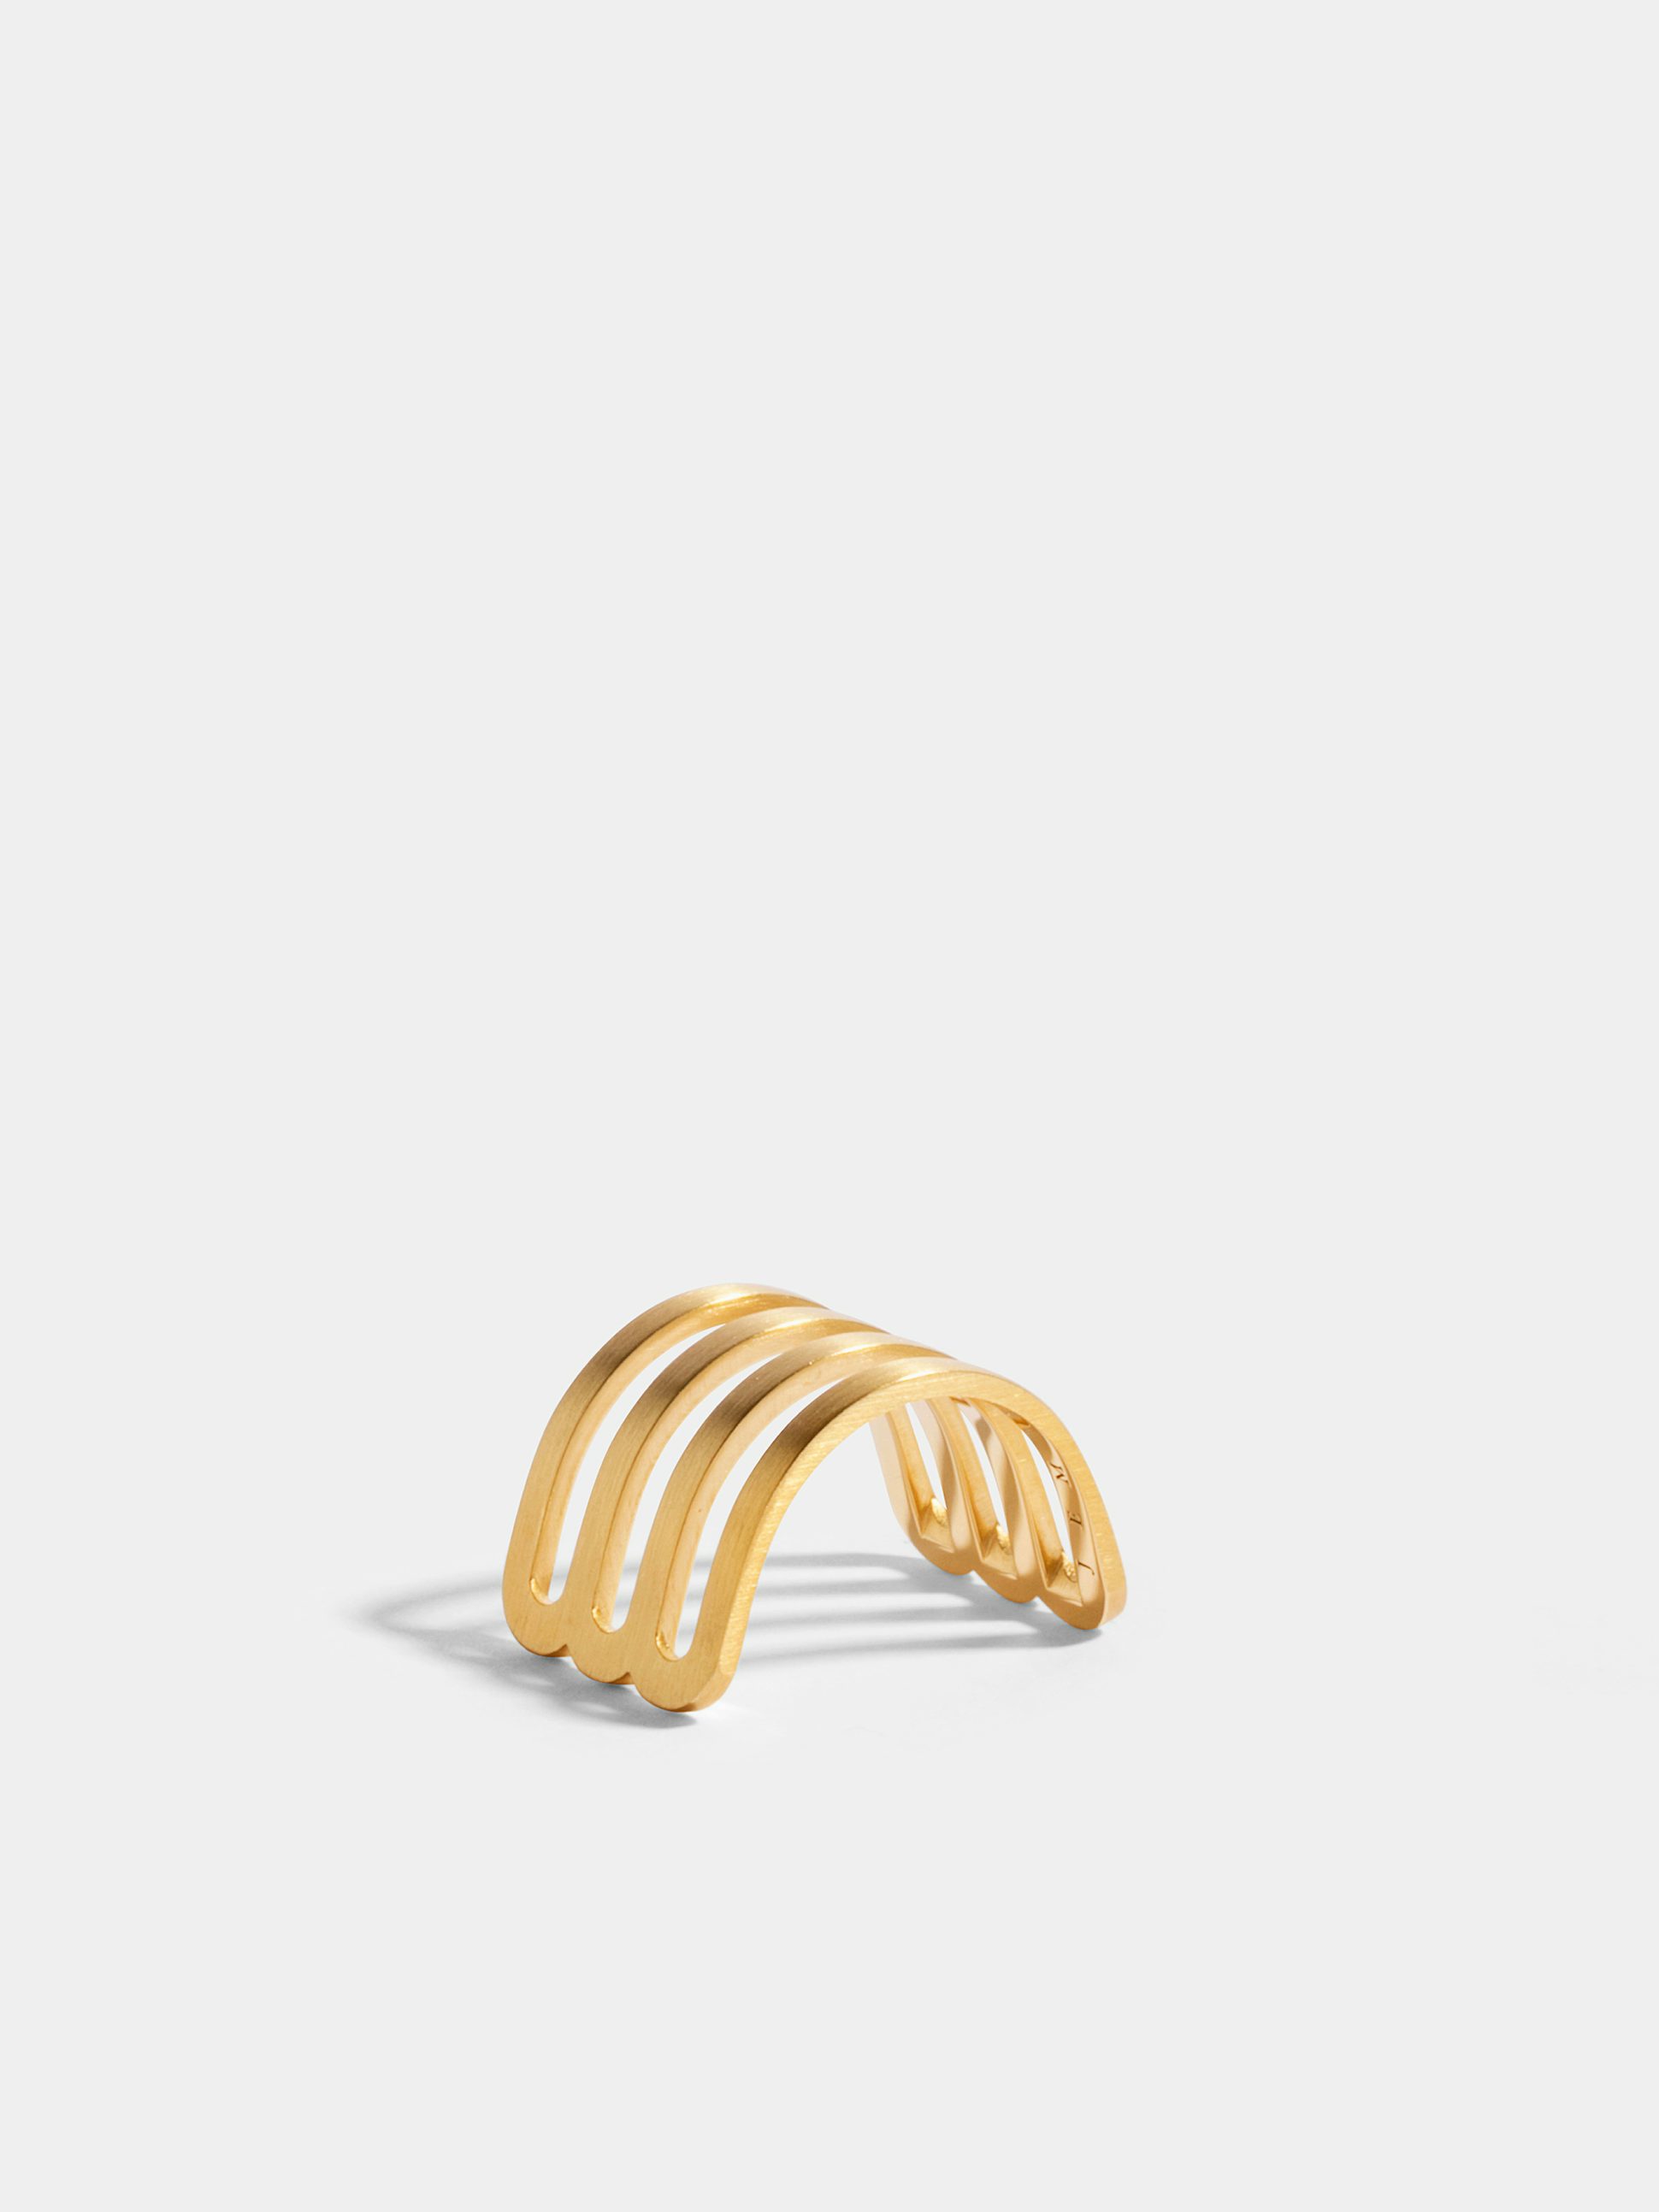 Étreintes triple half-ring in 18k Fairmined ethical yellow gold, with brushed finish.